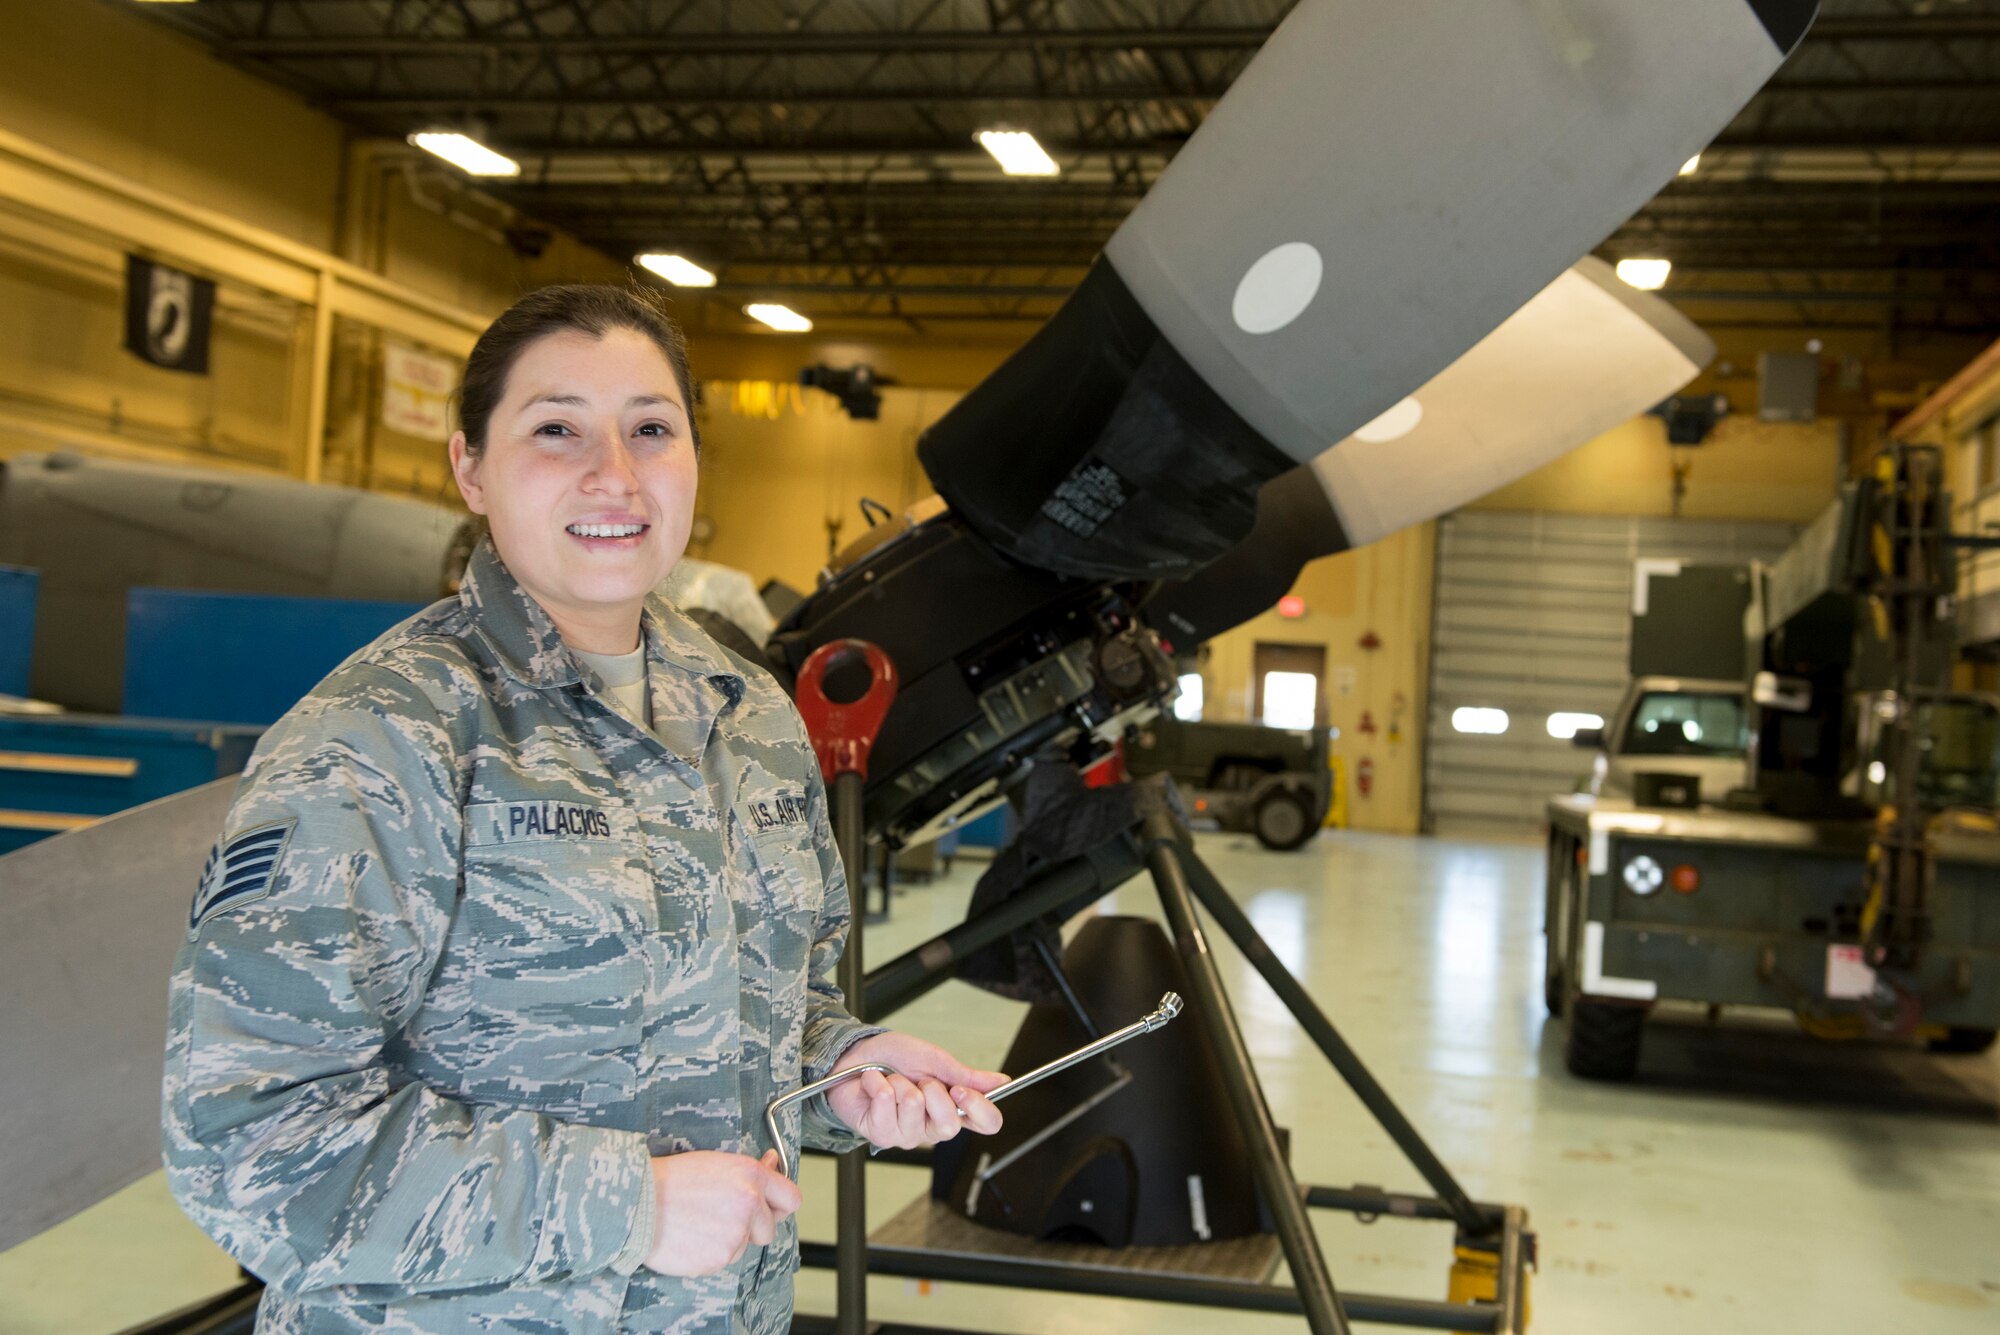 U.S. Air Force Staff Sgt. Samantha Palacios, an aerospace propulsion specialist at the 182nd Maintenance Squadron, Illinois Air National Guard, is pictured in the machine shop at the 182nd Airlift Wing, Peoria, Ill., April 8, 2018.